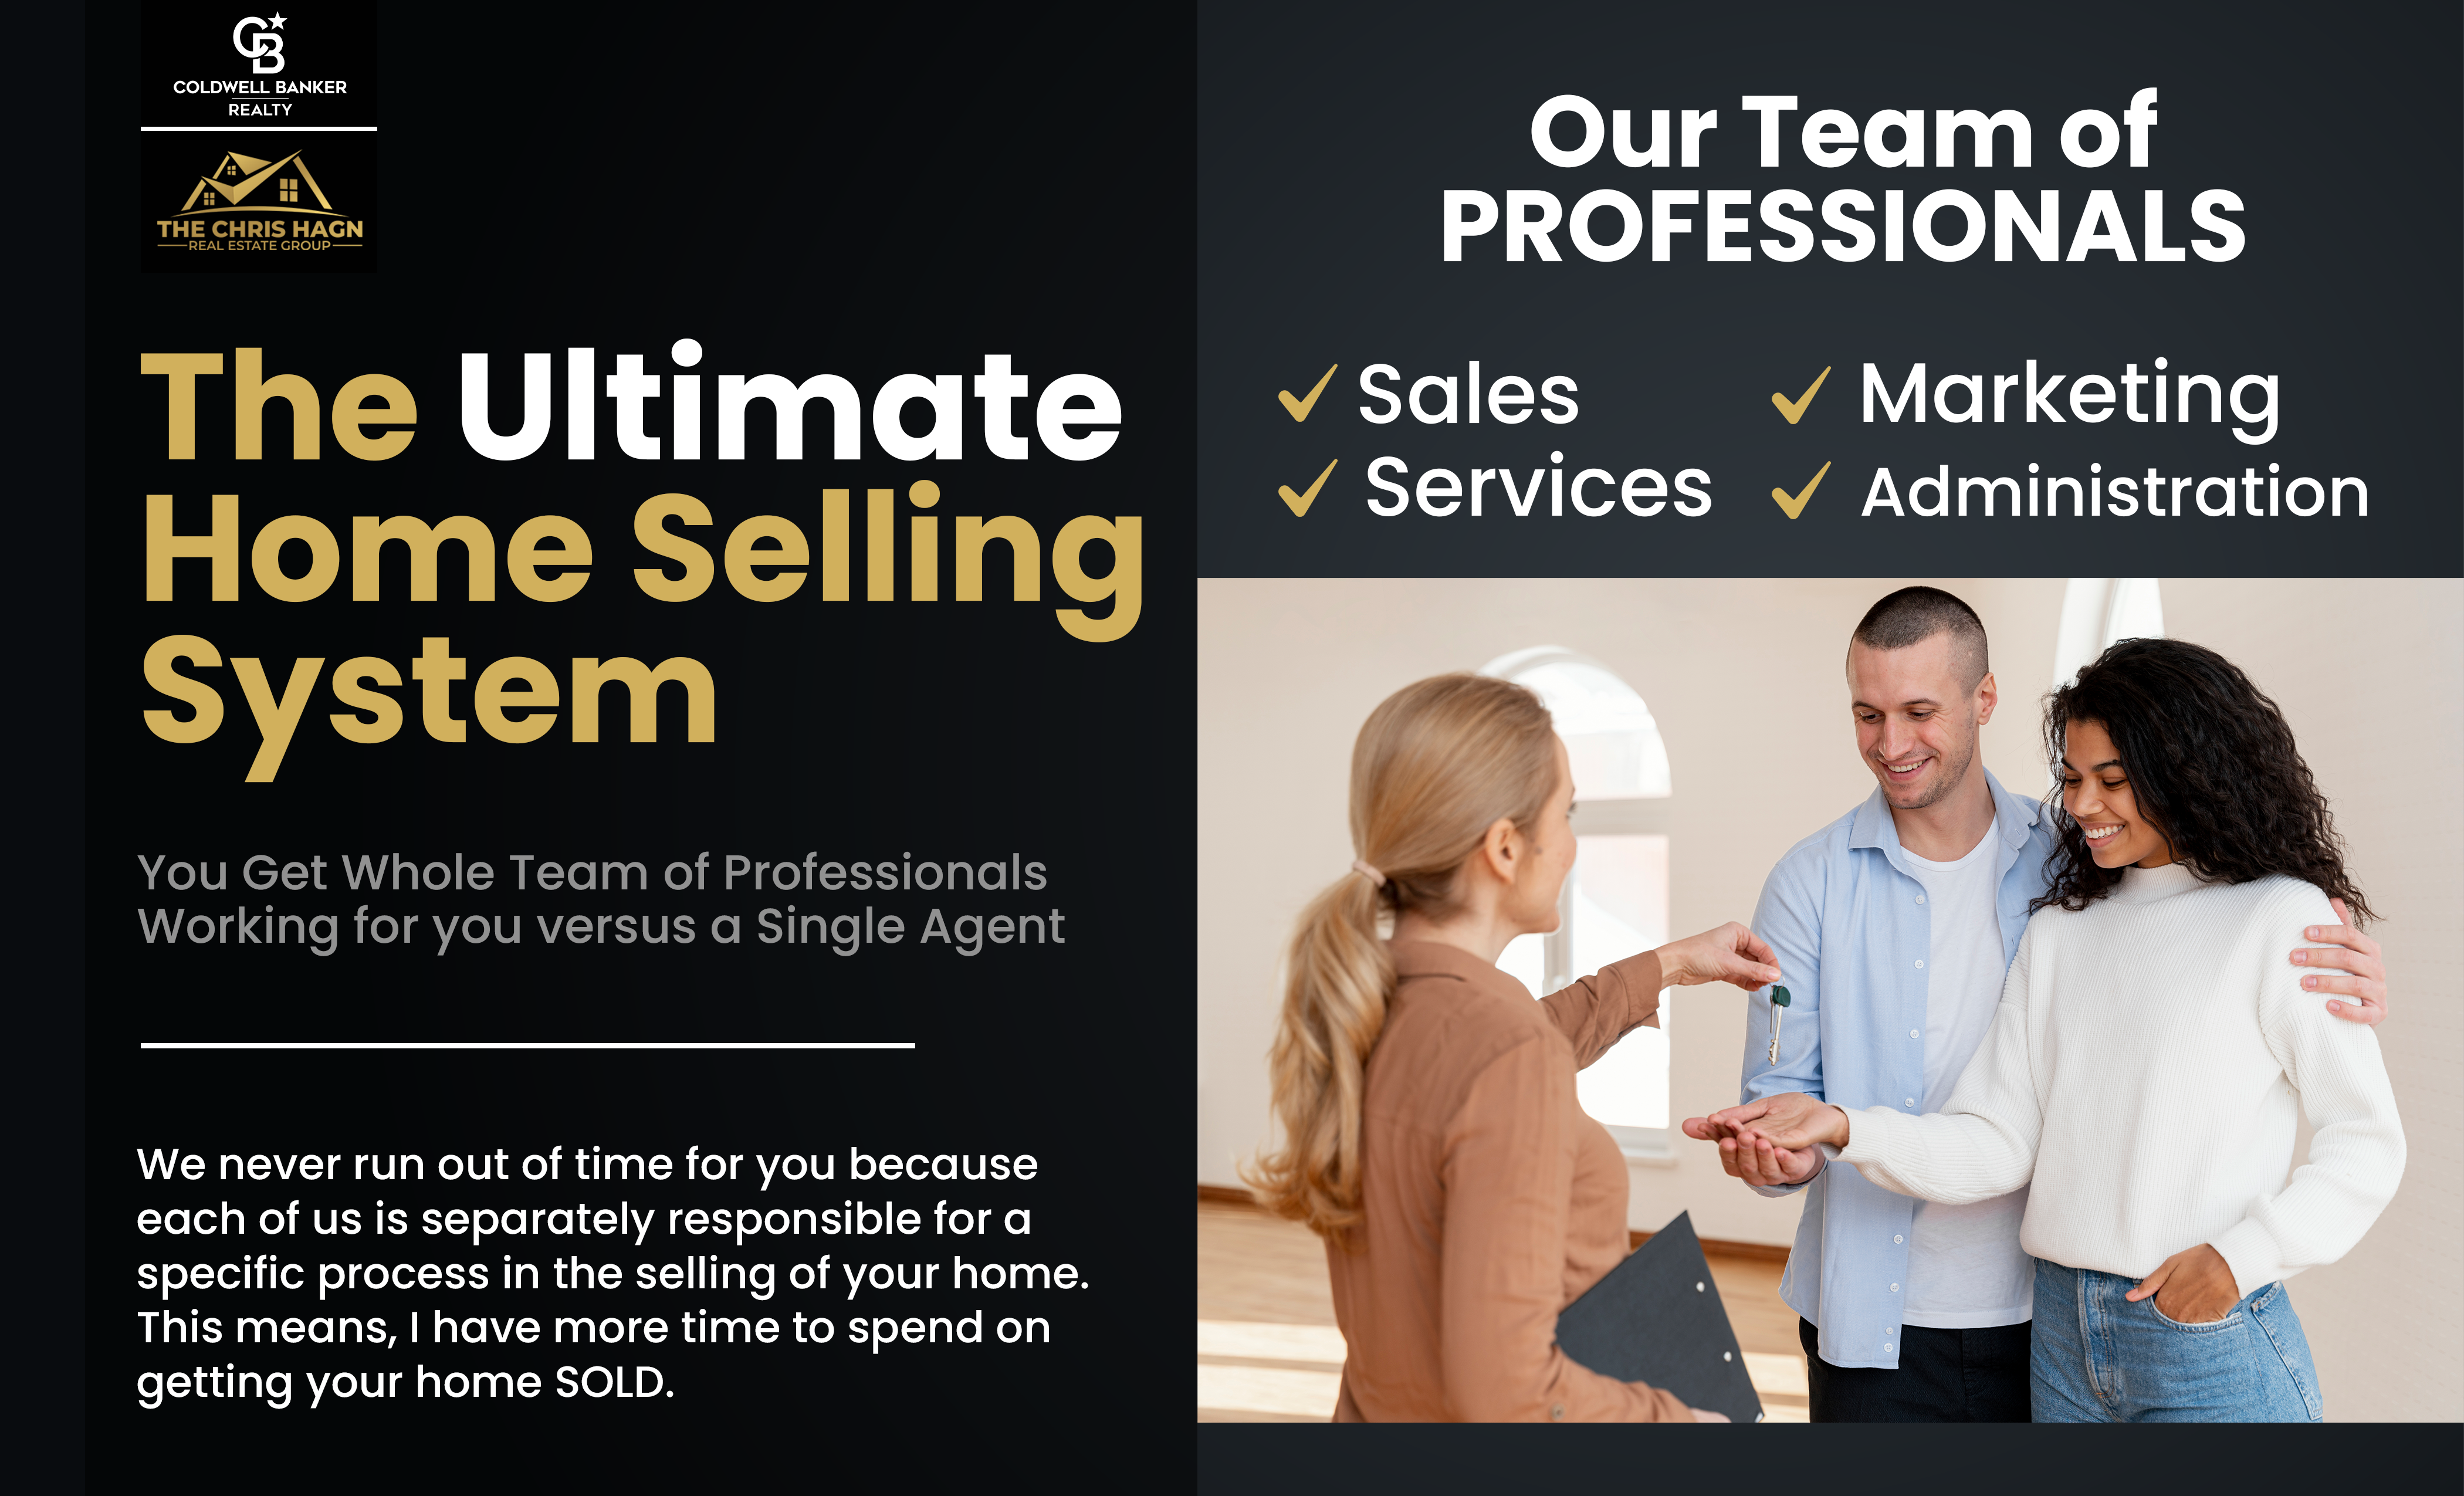 THE ULTIMATE HOME SELLING SYSTEM